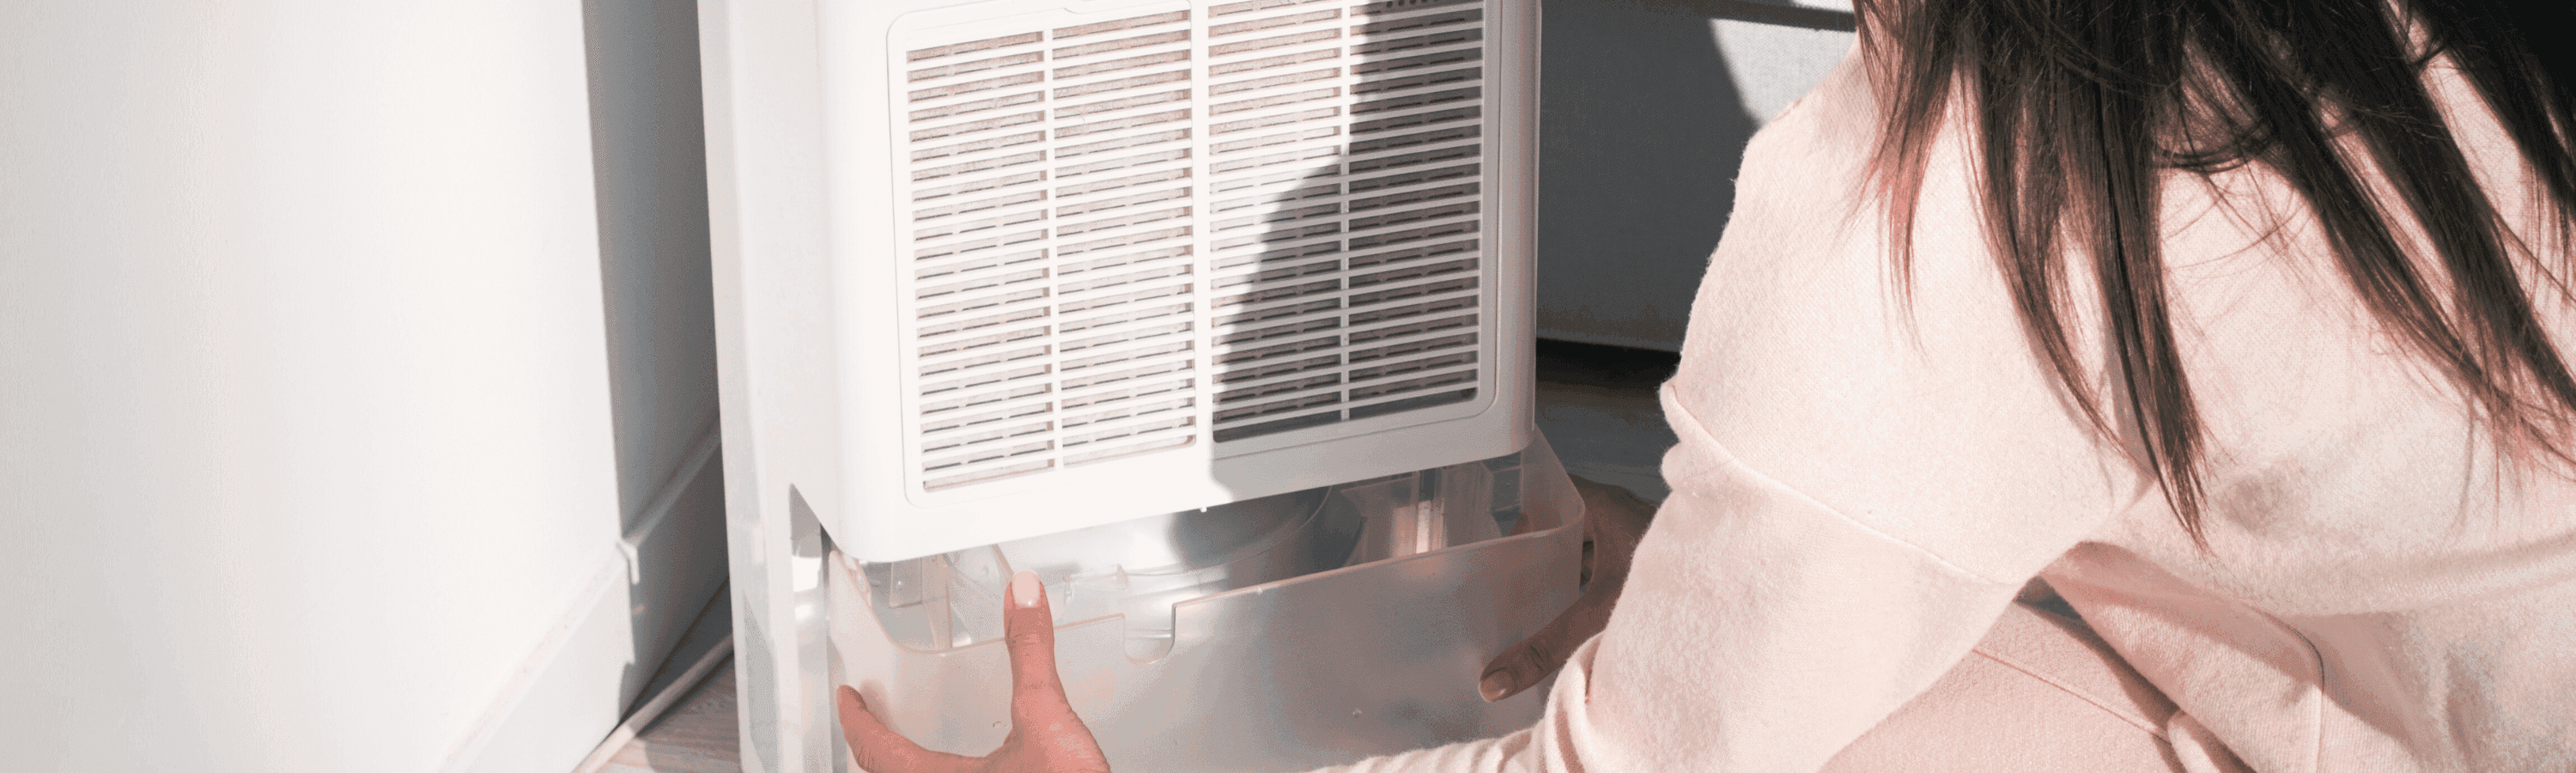 Woman Changing Water Container in Air Dryer, Dehumidifier